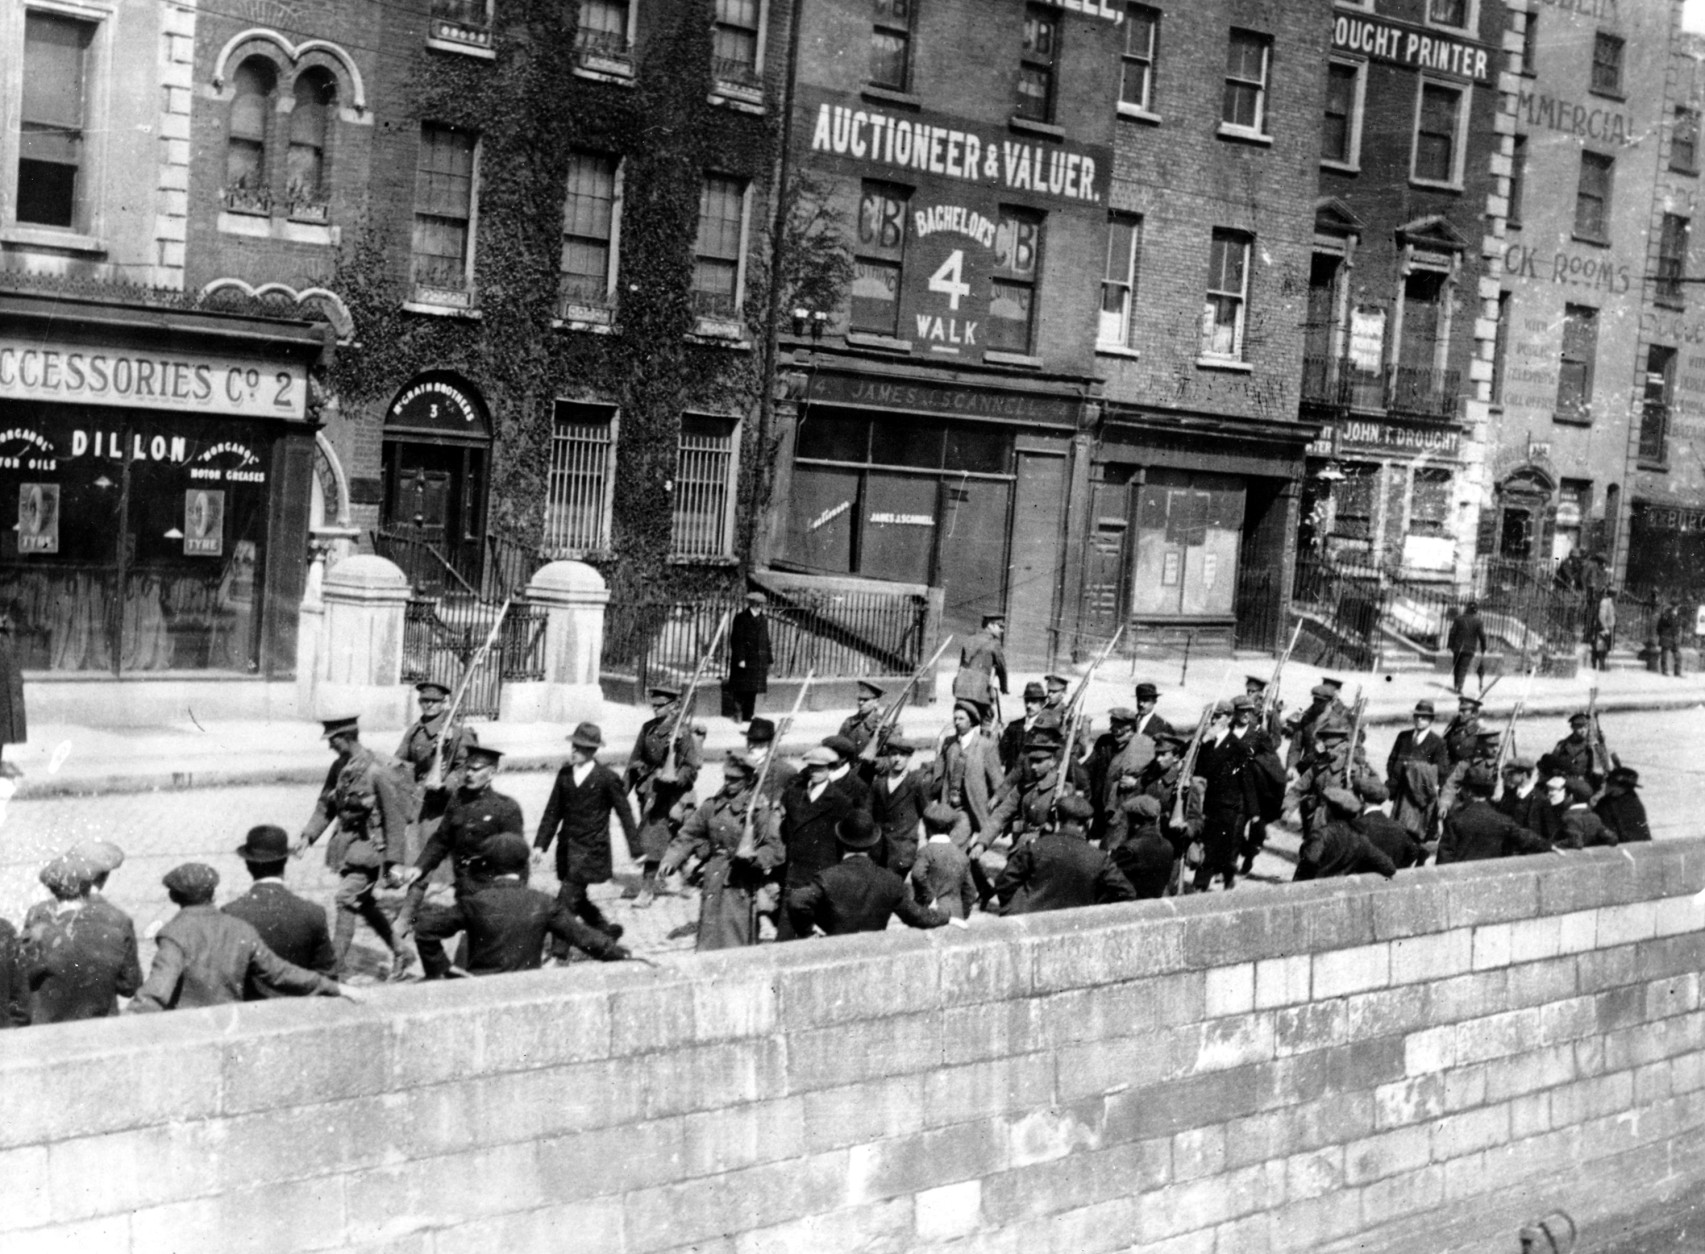 Irish prisoners march along a Dublin quay under a  British guard during the bloody Irish Insurrection that began on Easter Monday, April 24, 1916, in Dublin, Ireland.  Thousands were killed and injured in the revolt.  Ten days later Patrick Pearse, Commandant General of 1,500 Irishmen who threw down an armed challenge, was dead and 14 of his comrades took their turn before the British firing squads. Many more thousands were made prisoners in the Easter Rising. (AP Photo)